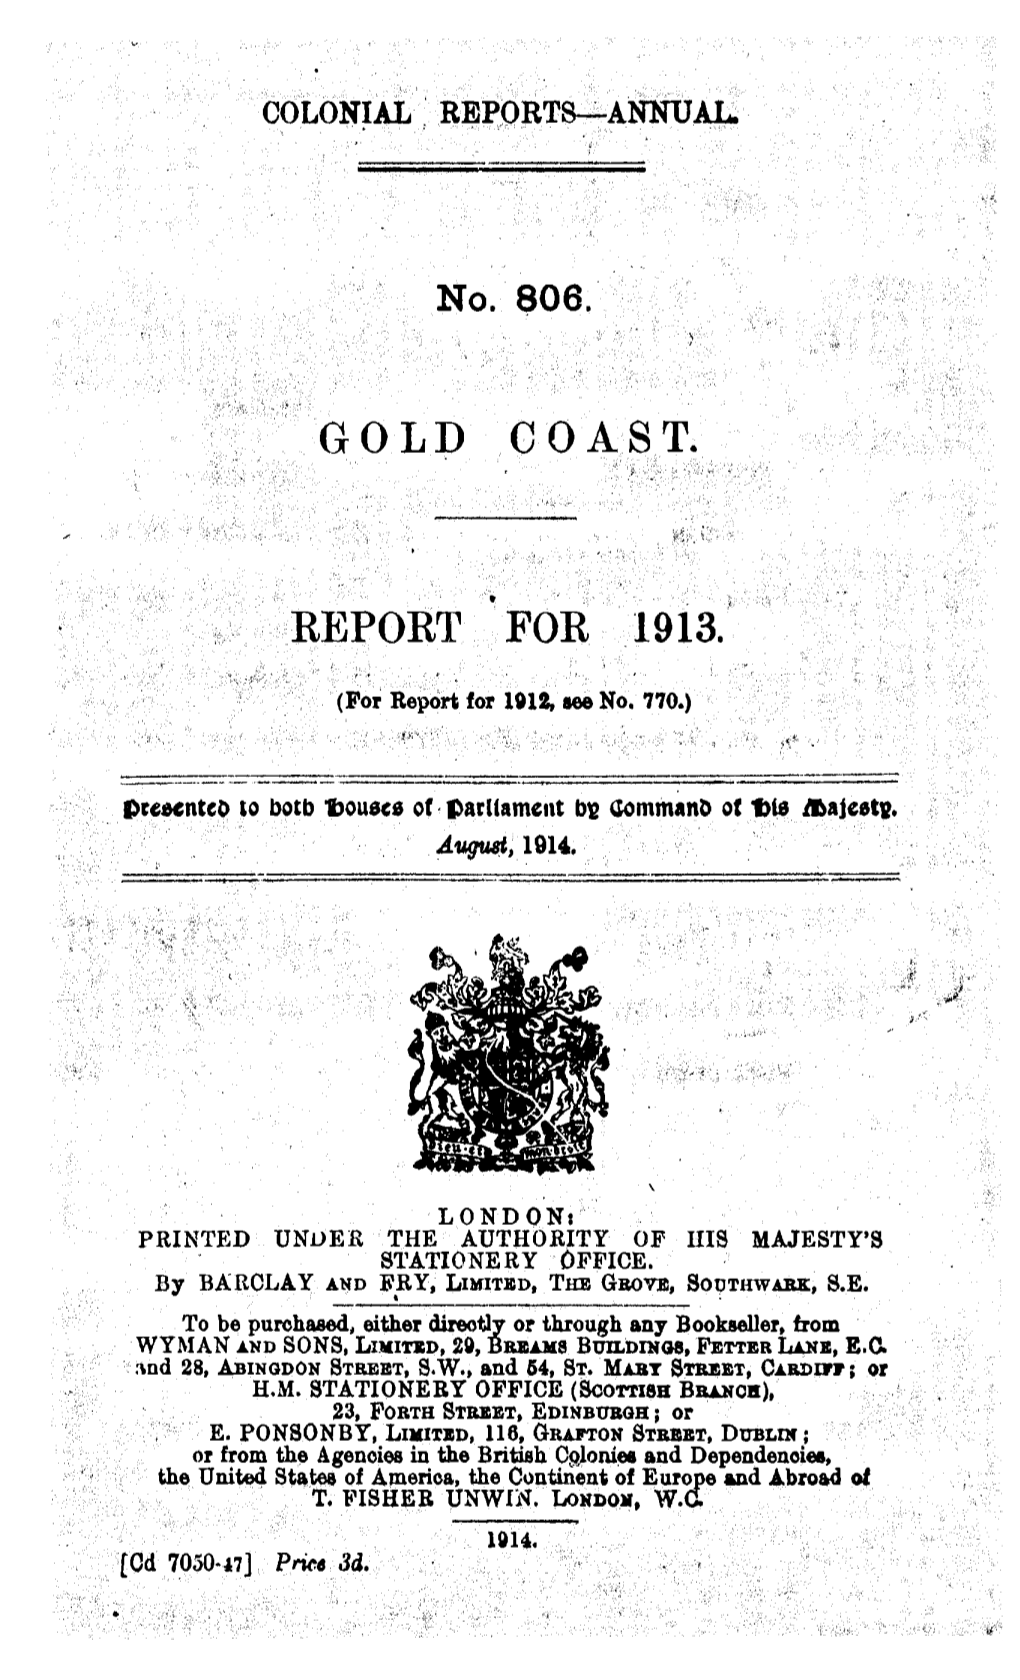 Annual Reports of the Colonies, Gold Coast, 1913